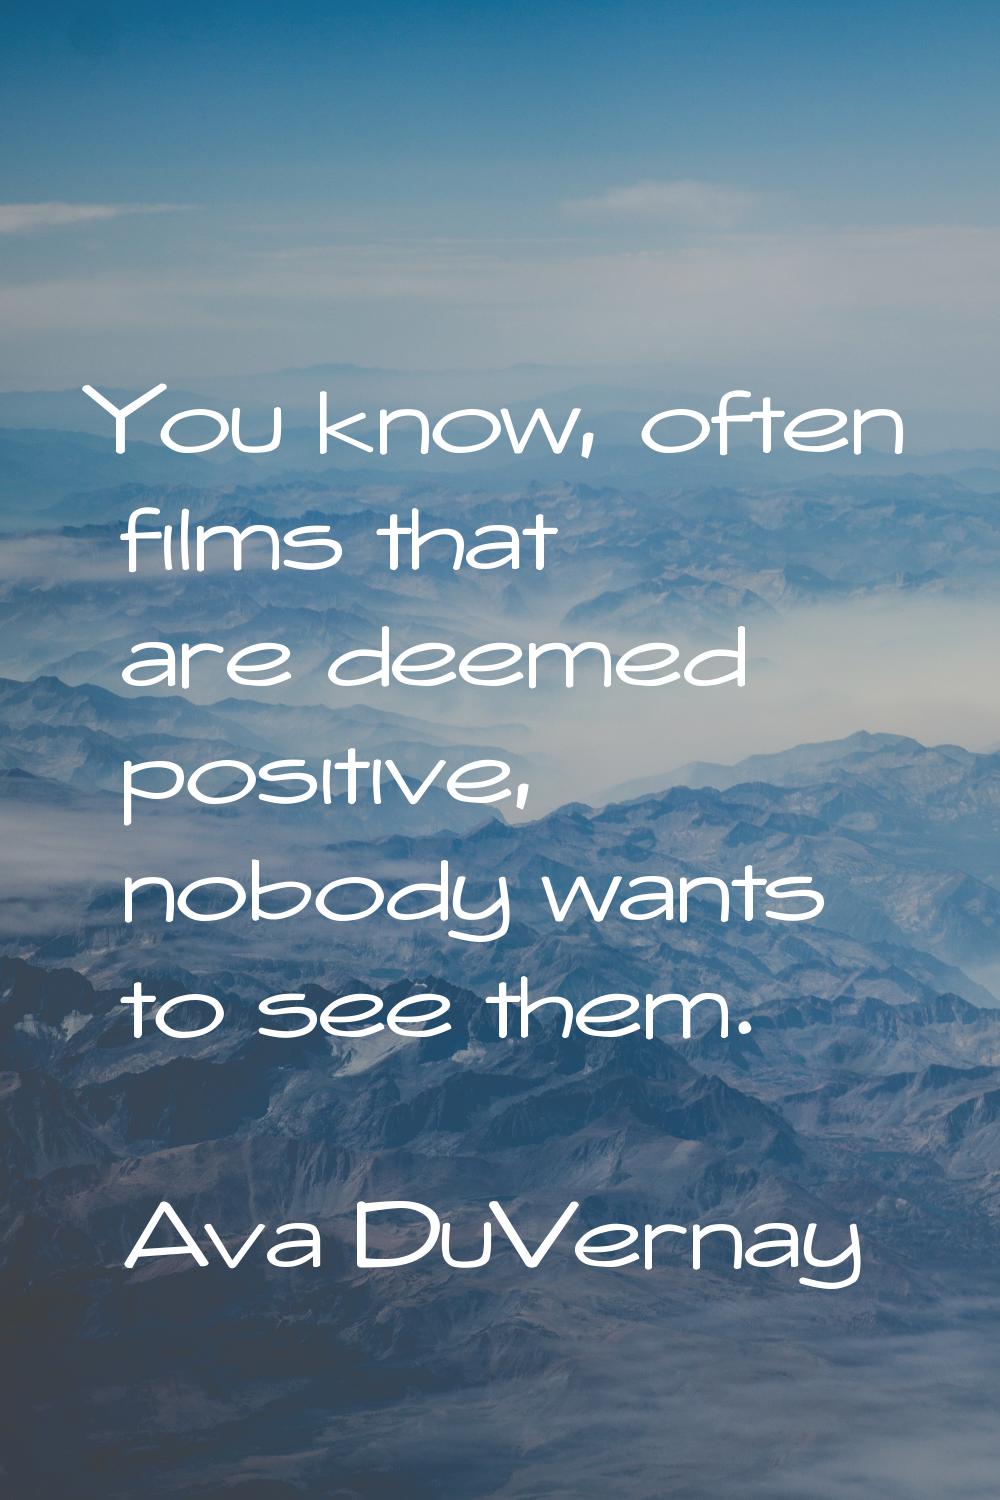 You know, often films that are deemed positive, nobody wants to see them.